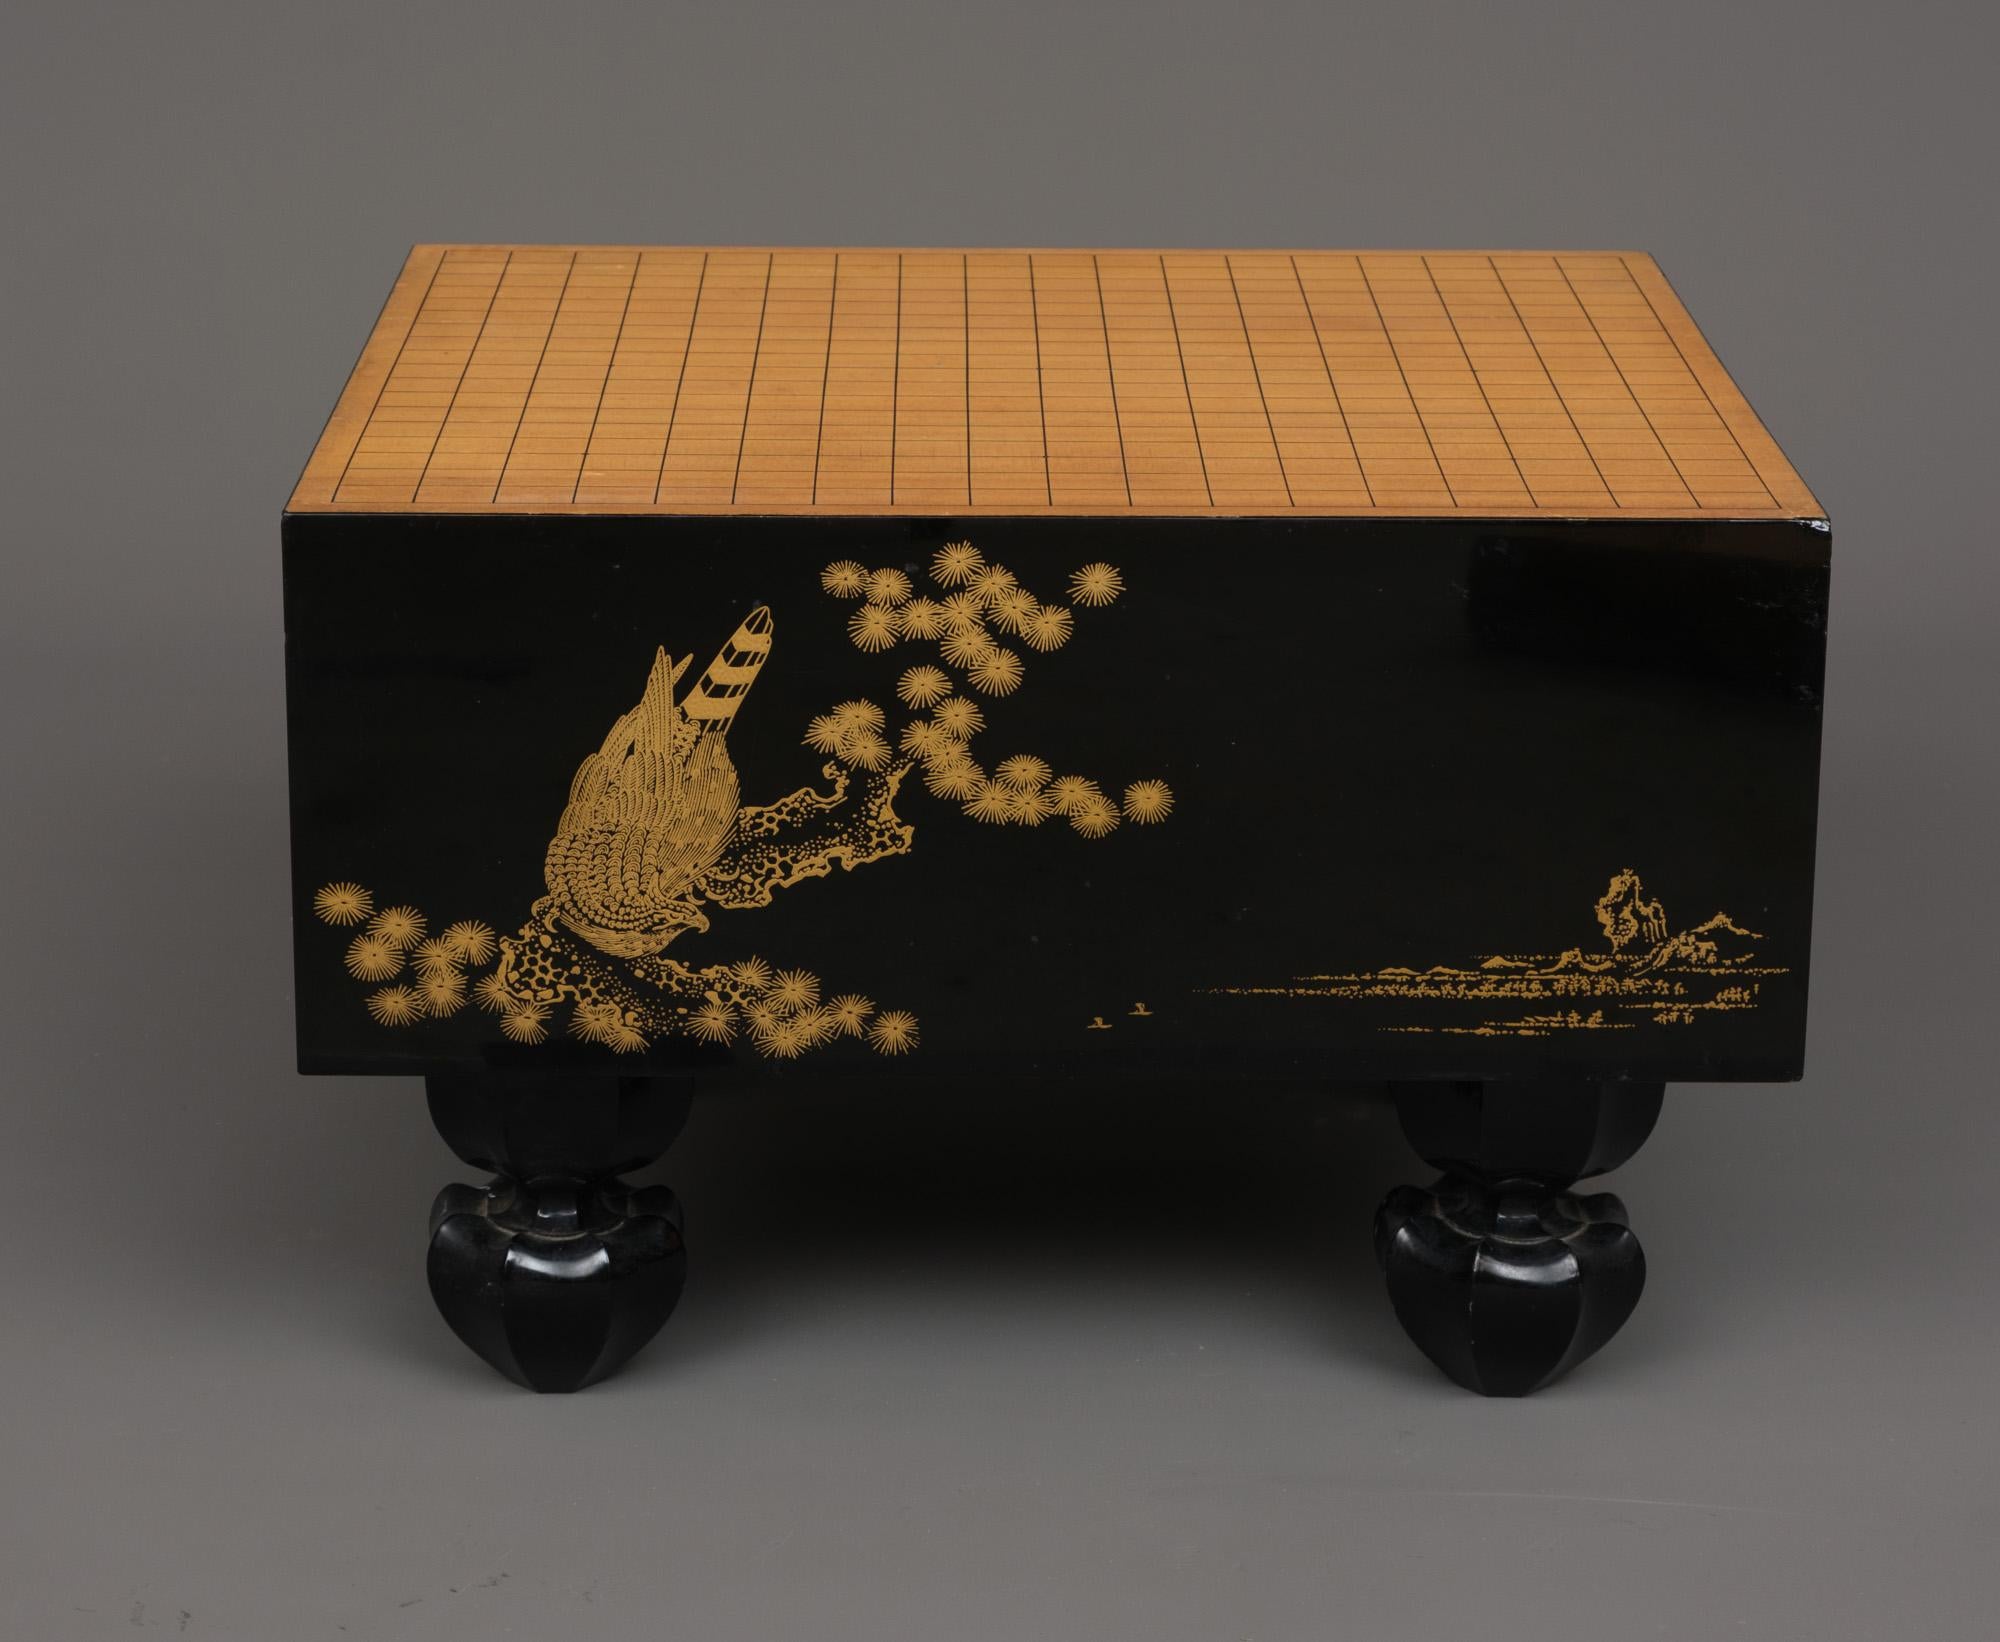 Japanese lacquer solid wooden go-game table 碁盤 (goban) complete with go-stones 4